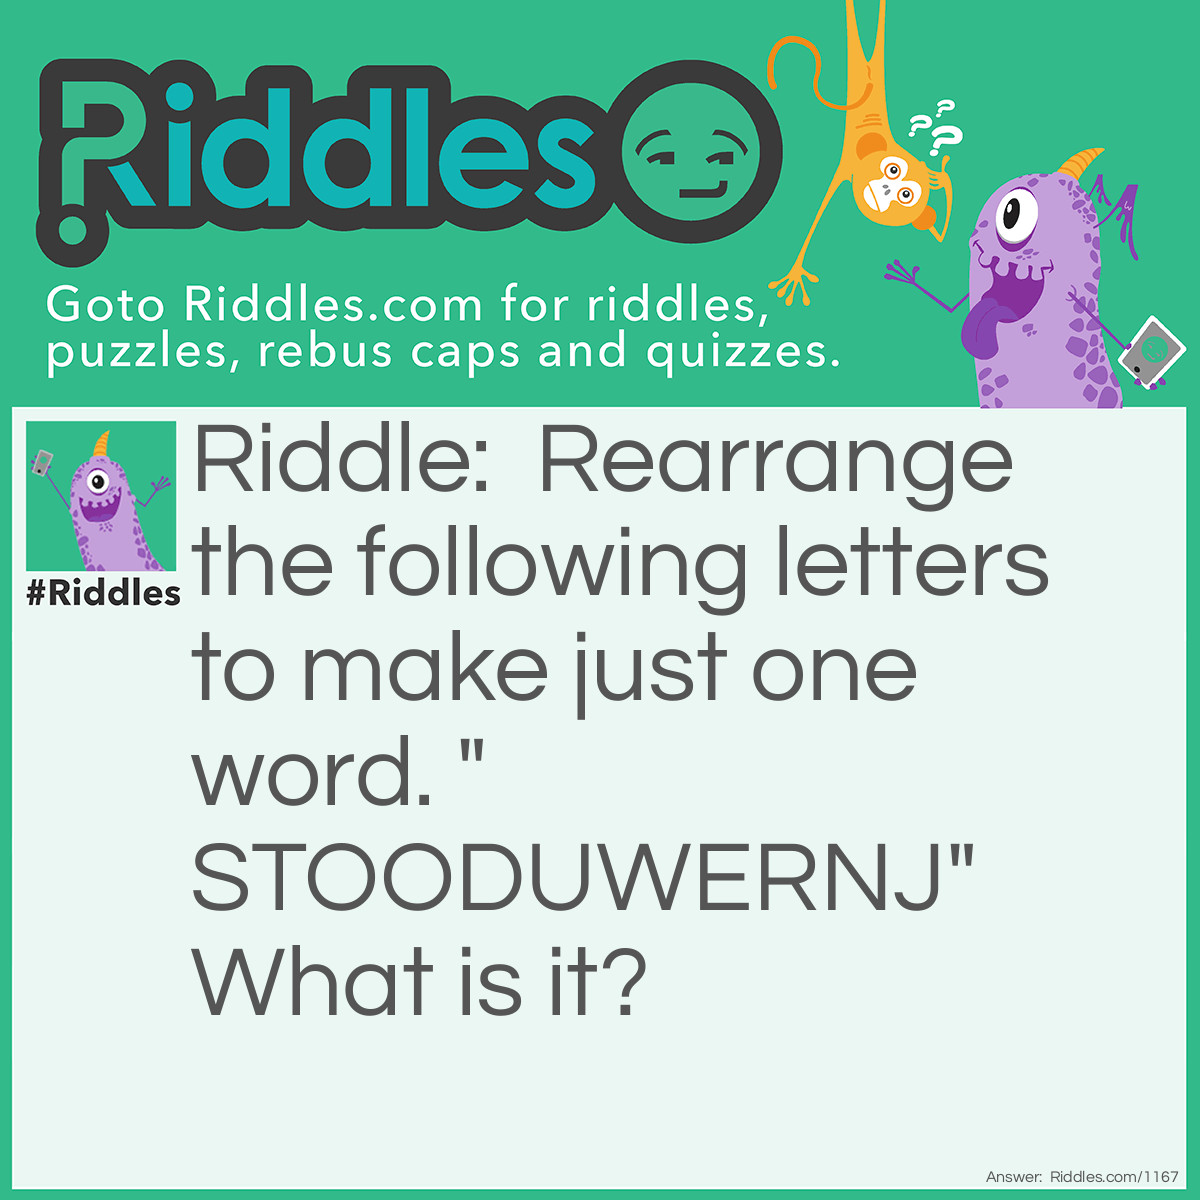 Riddle: Rearrange the following letters to make just one word. "STOODUWERNJ" What is it? Answer: Just one word.